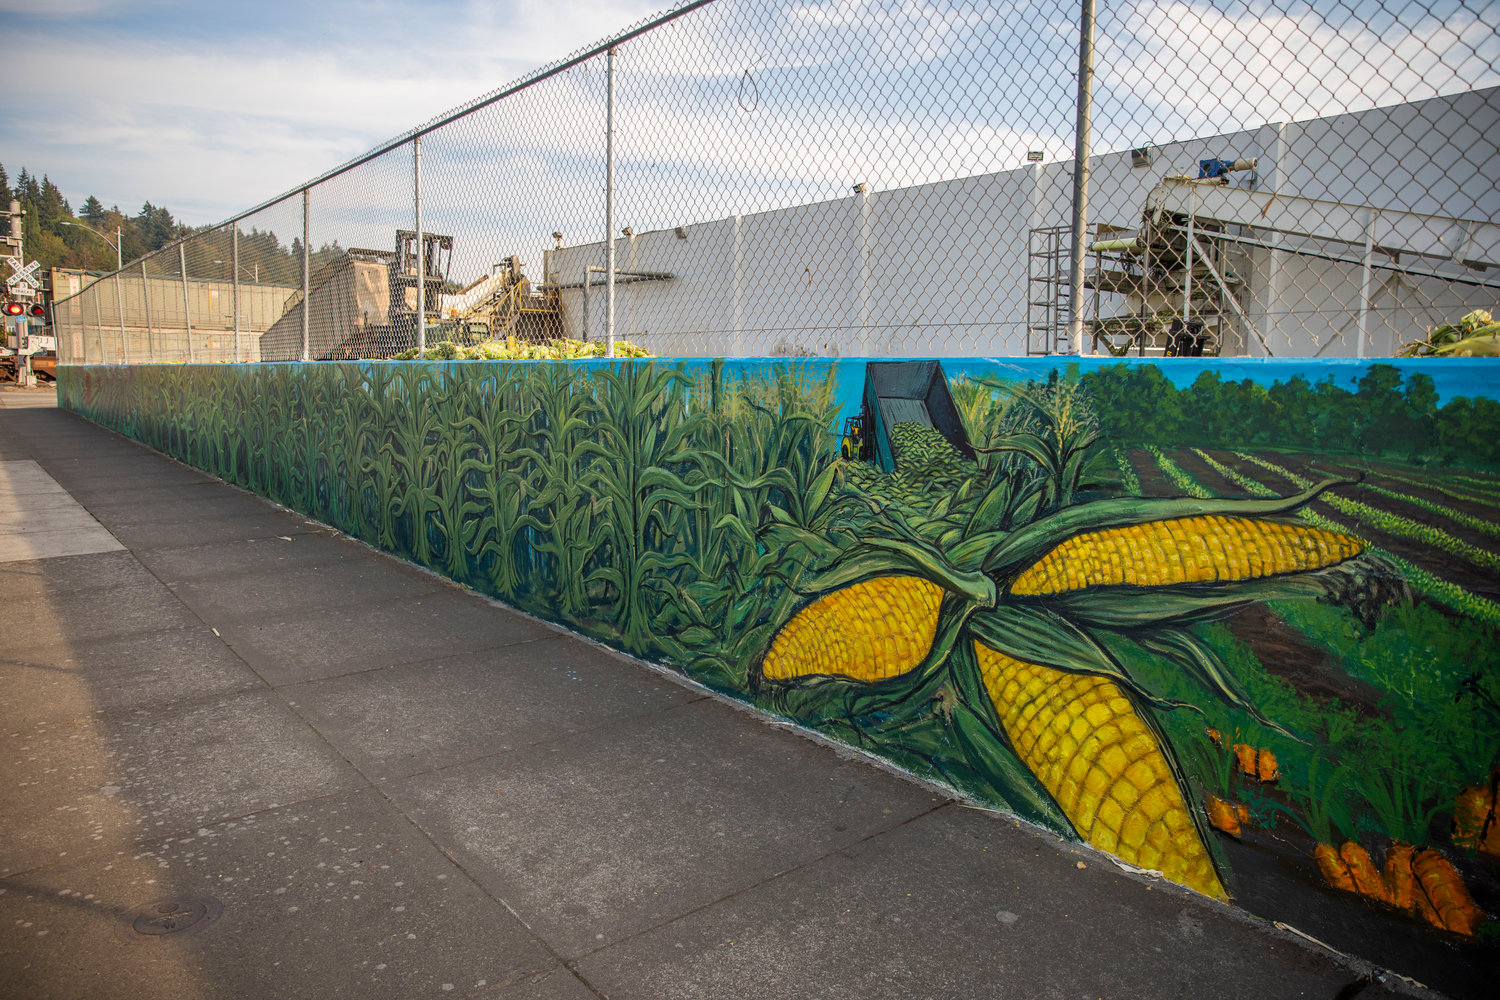 A new mural displays vibrant colors outside the National Frozen Foods Corporation location along Northwest West Street in Chehalis on Thursday. The mural was created by artist Thomas Sutley. It’s the latest mural created through Experience Chehalis, which partnered with National Frozen Foods.